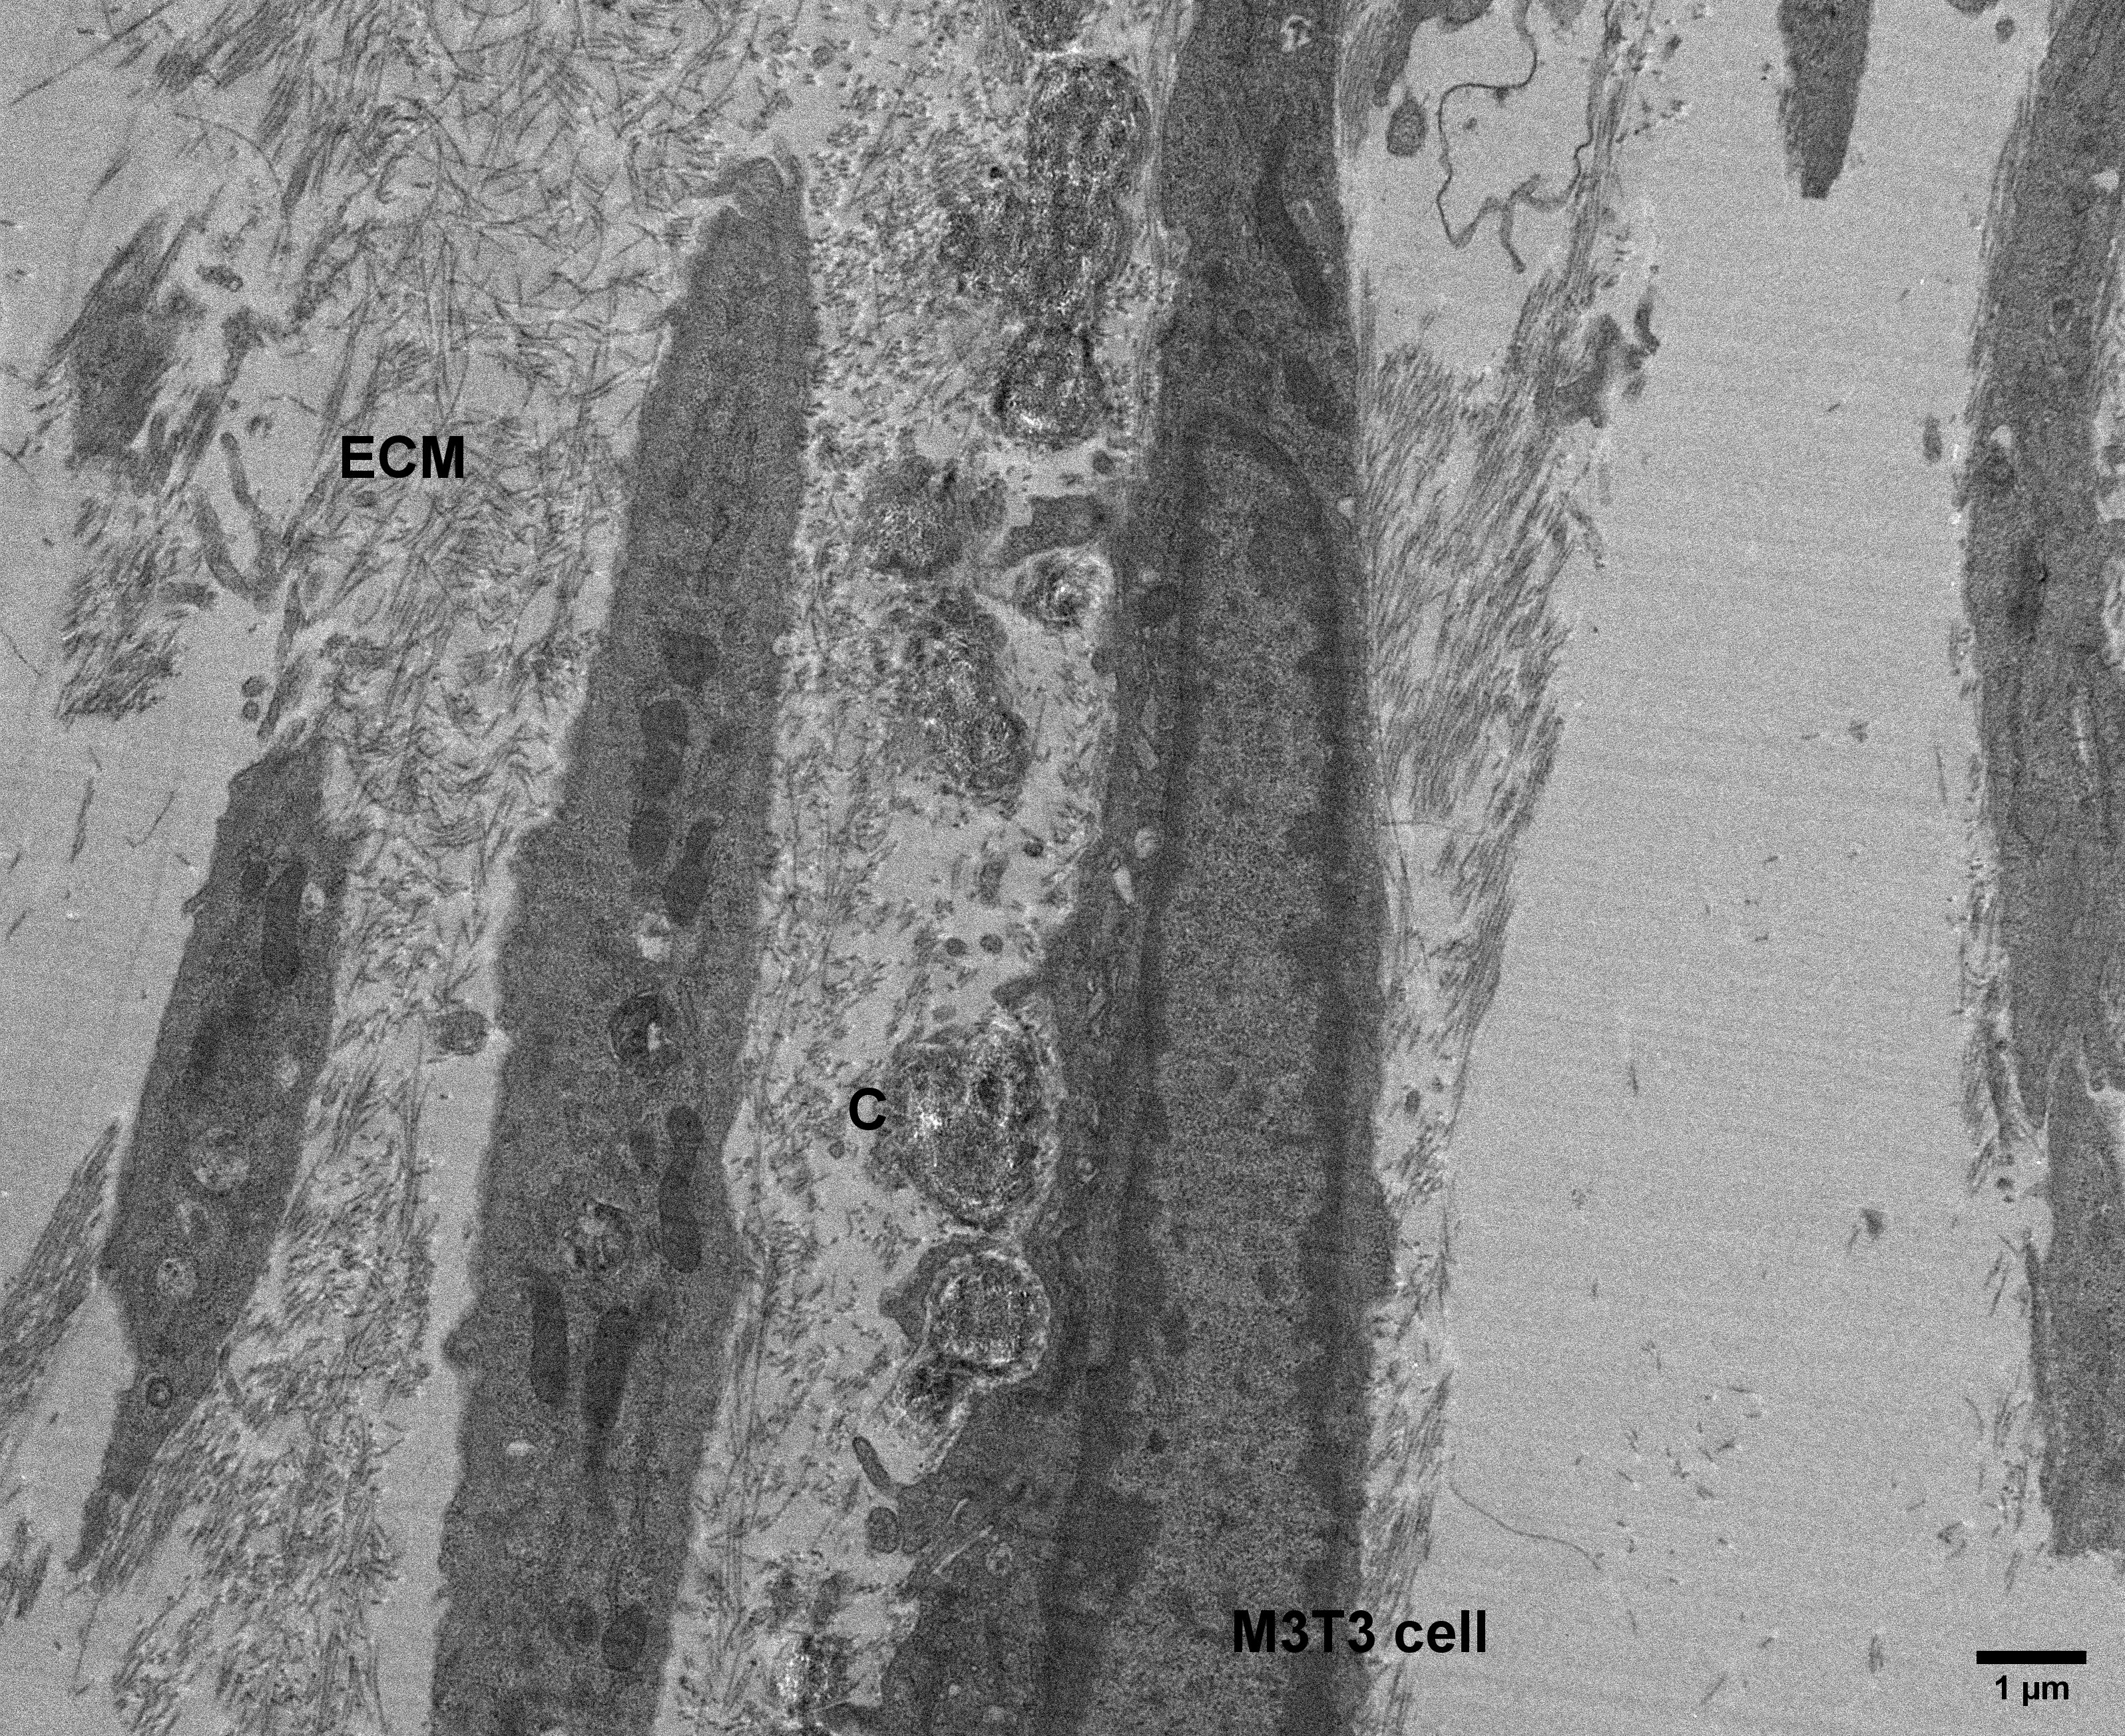 Culture of M3T3 cells induced in-vitro to produce extracellular matrix (ECM) and matrix calcifications (C). Low-magnification overview image; the knife mark striations are caused by the inherent calcium phosphate crystals (doi.org/10.1016/j.celrep.2019.05